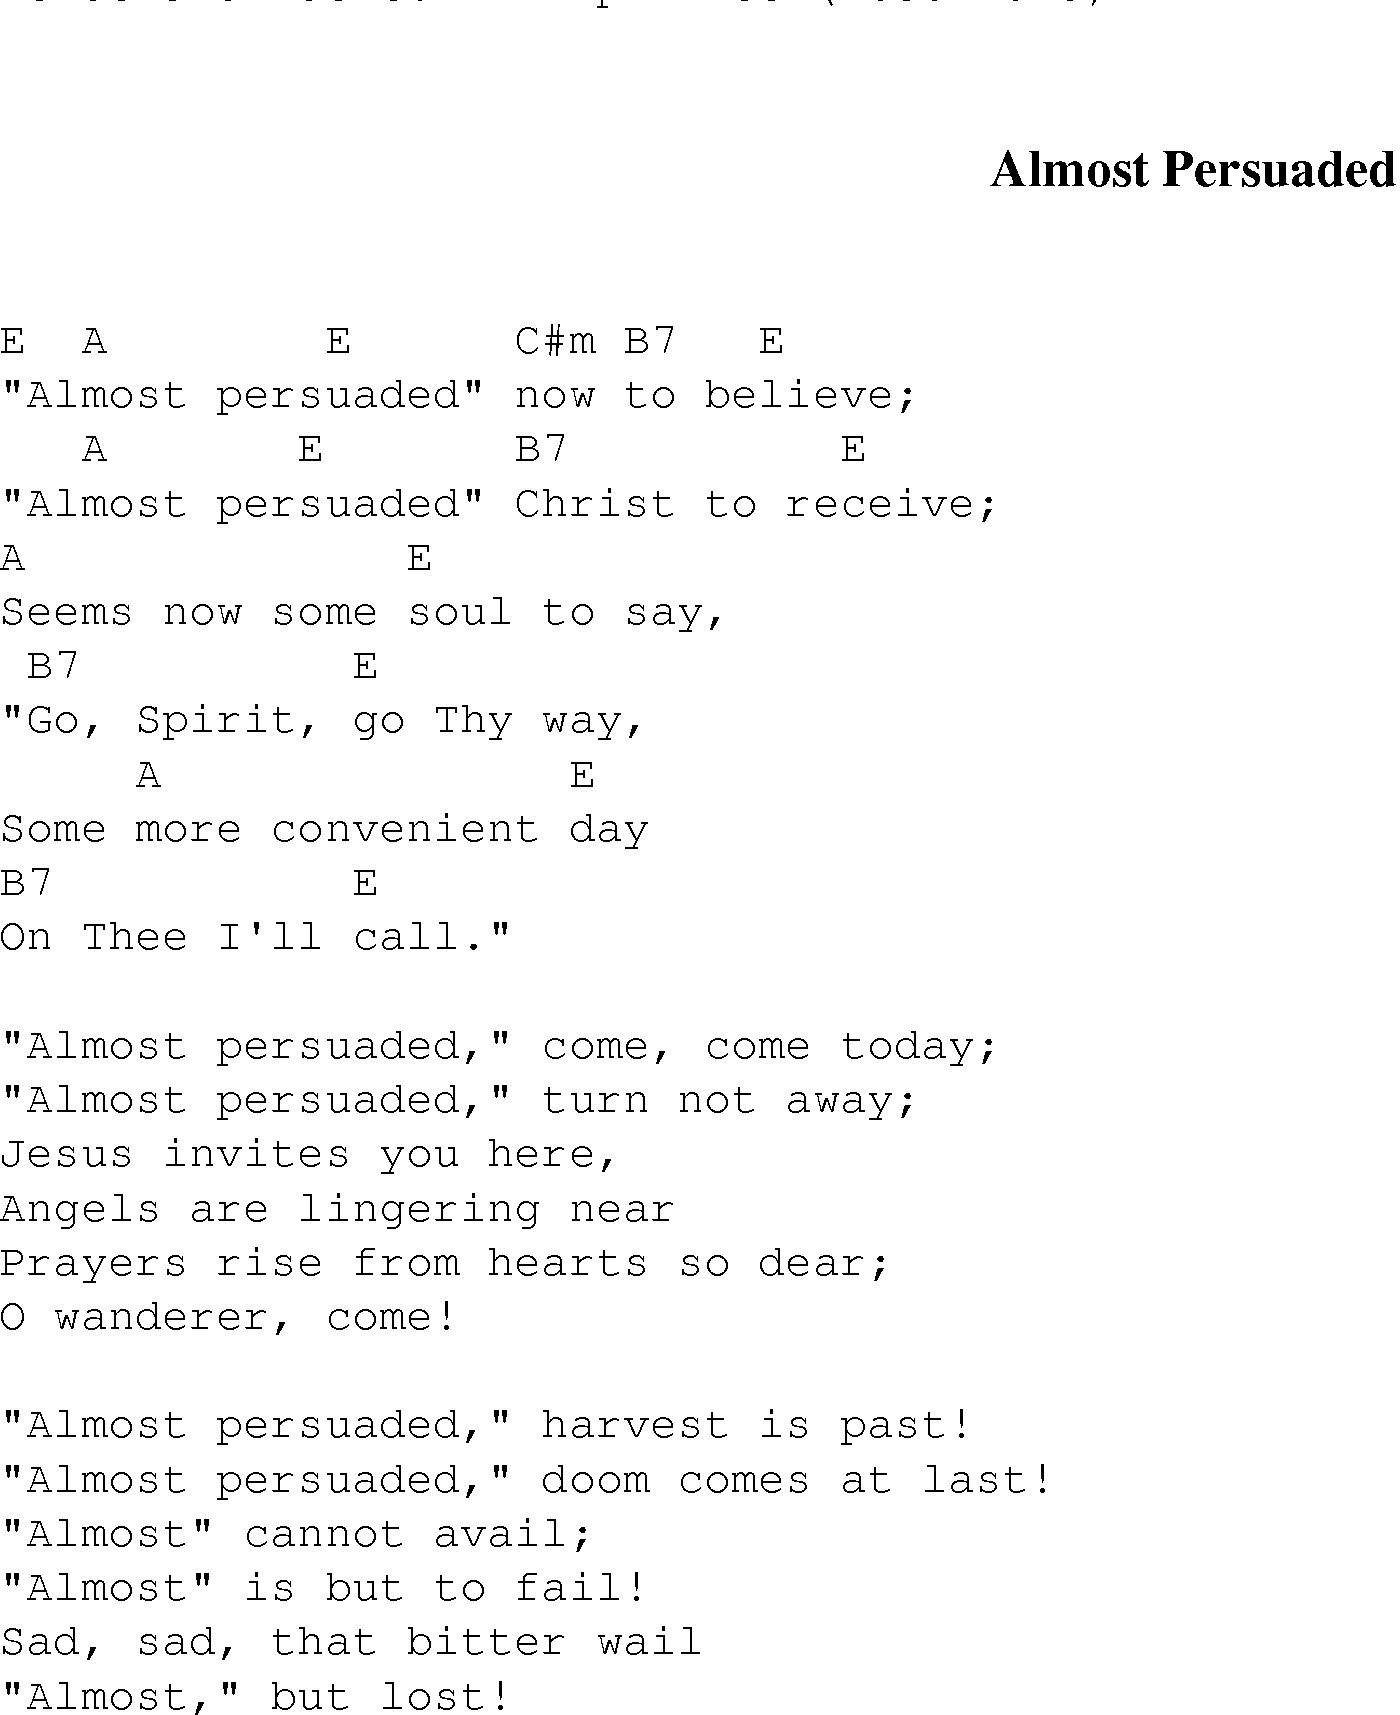 Gospel Song: almost_persuaded, lyrics and chords.